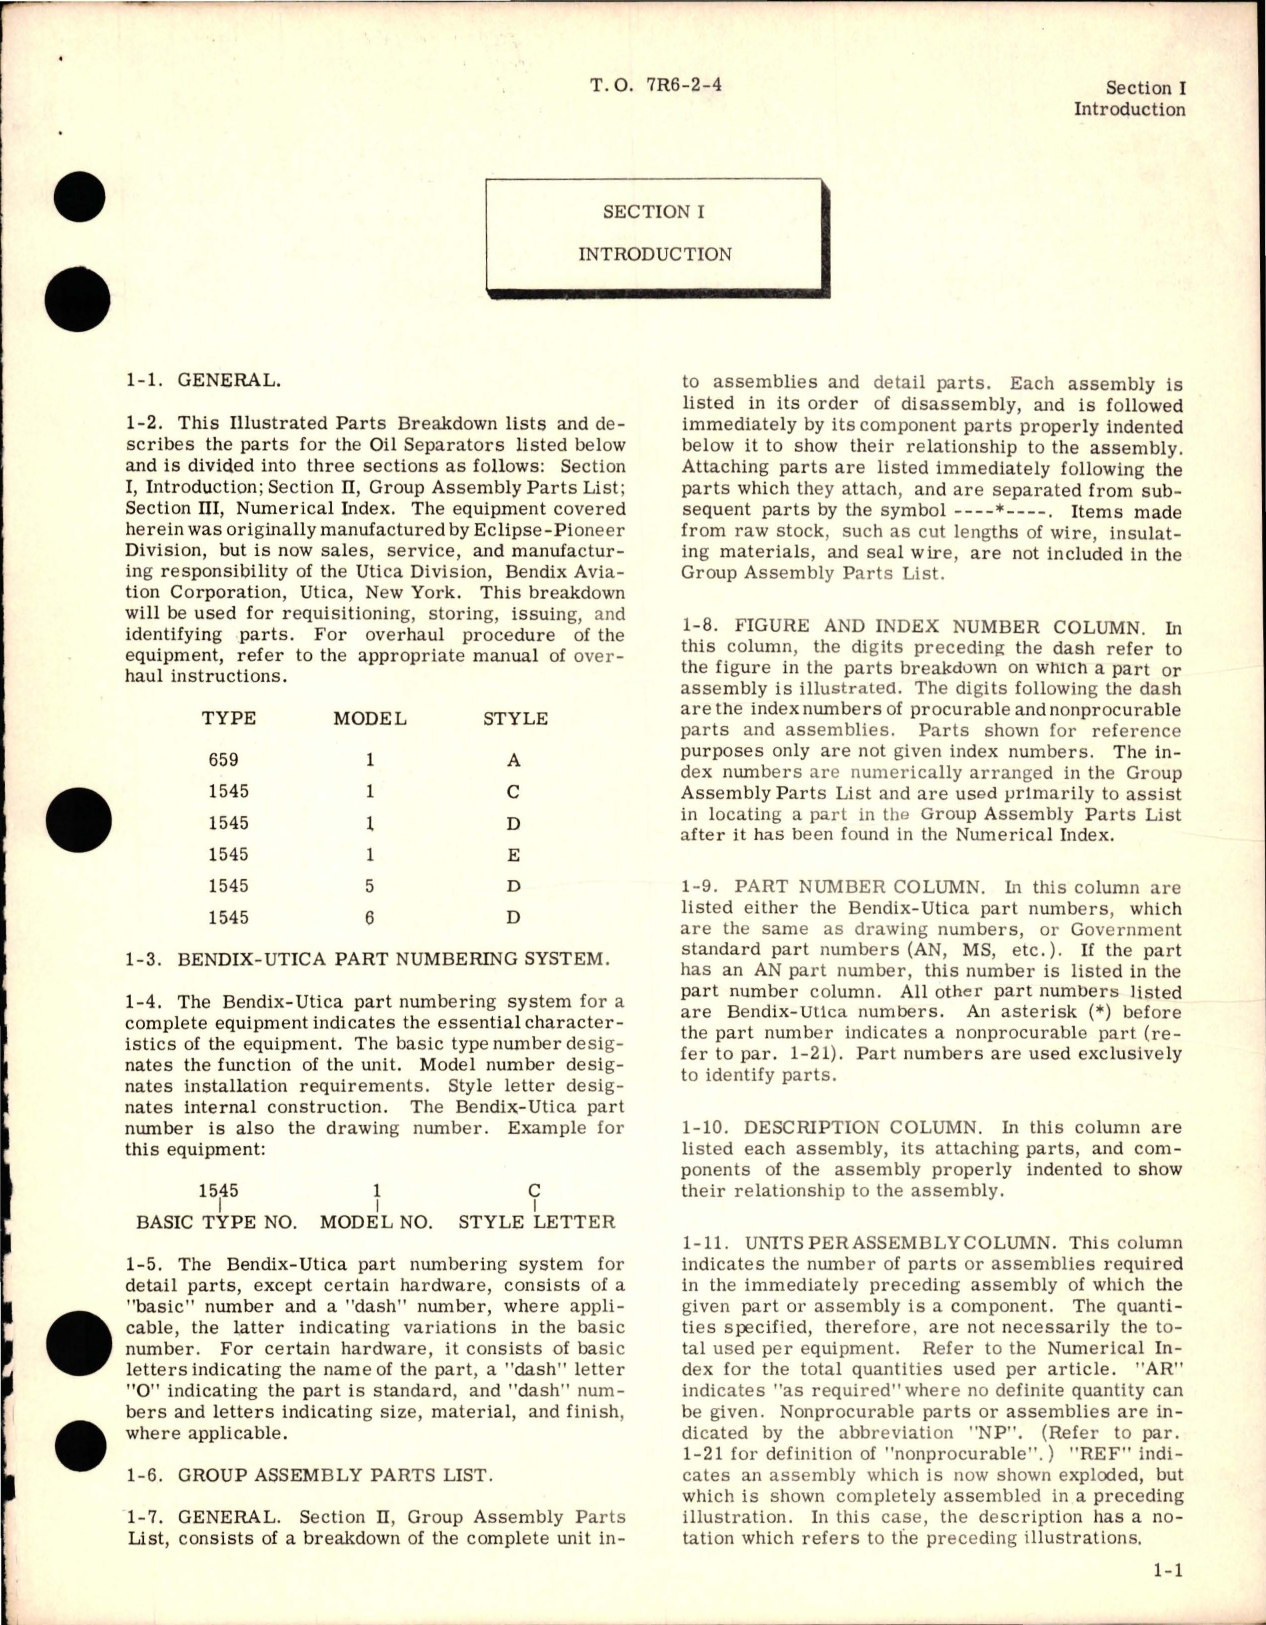 Sample page 5 from AirCorps Library document: Illustrated Parts Breakdown for Oil Separator 